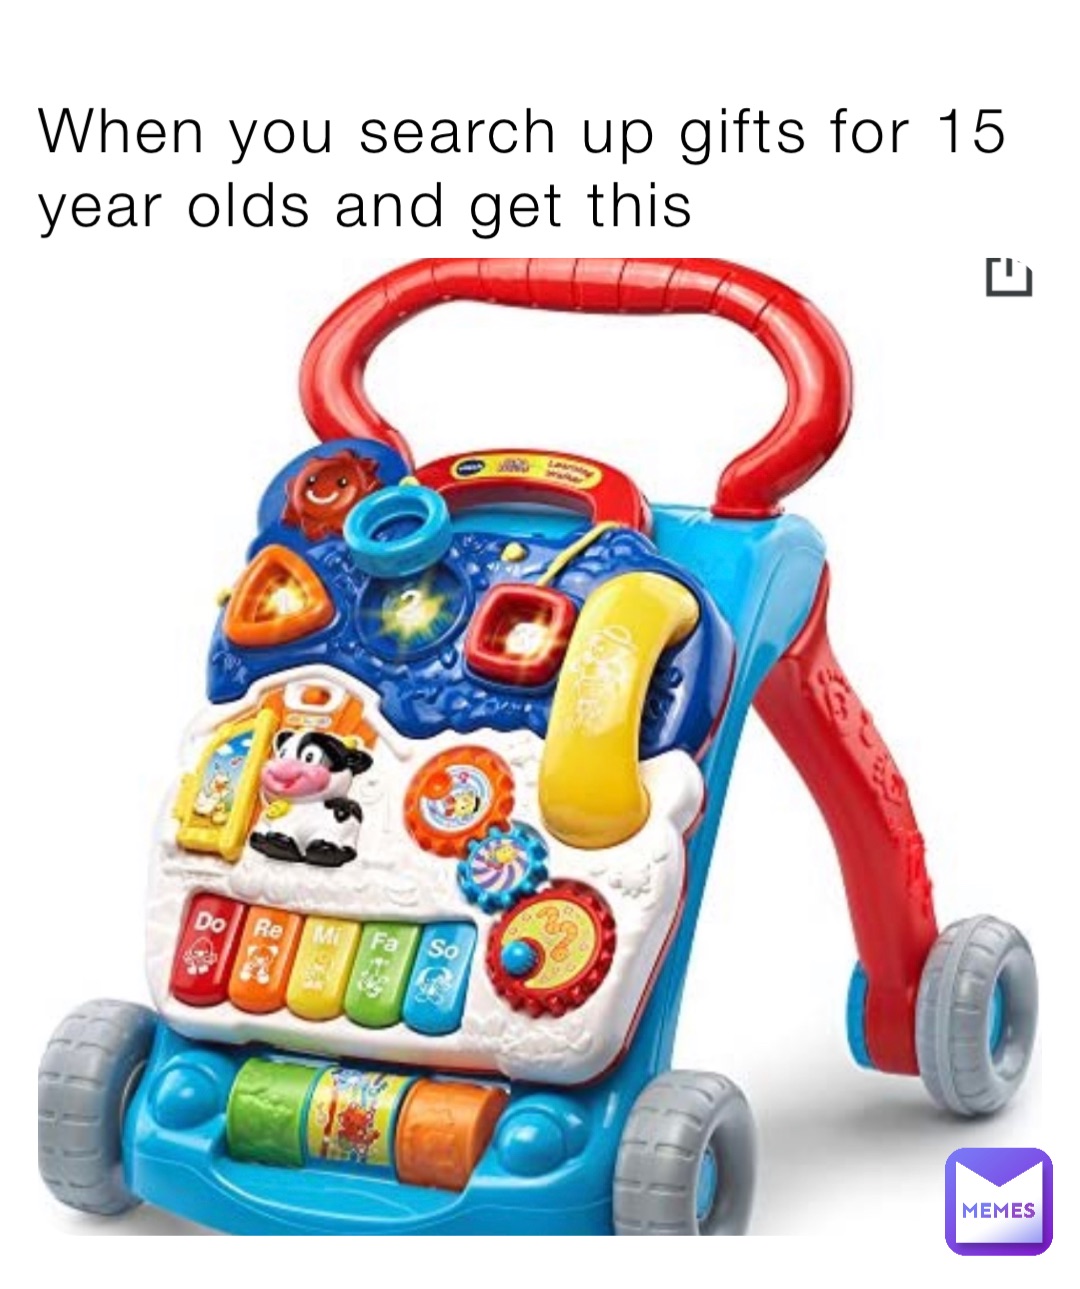 When you search up gifts for 15 year olds and get this